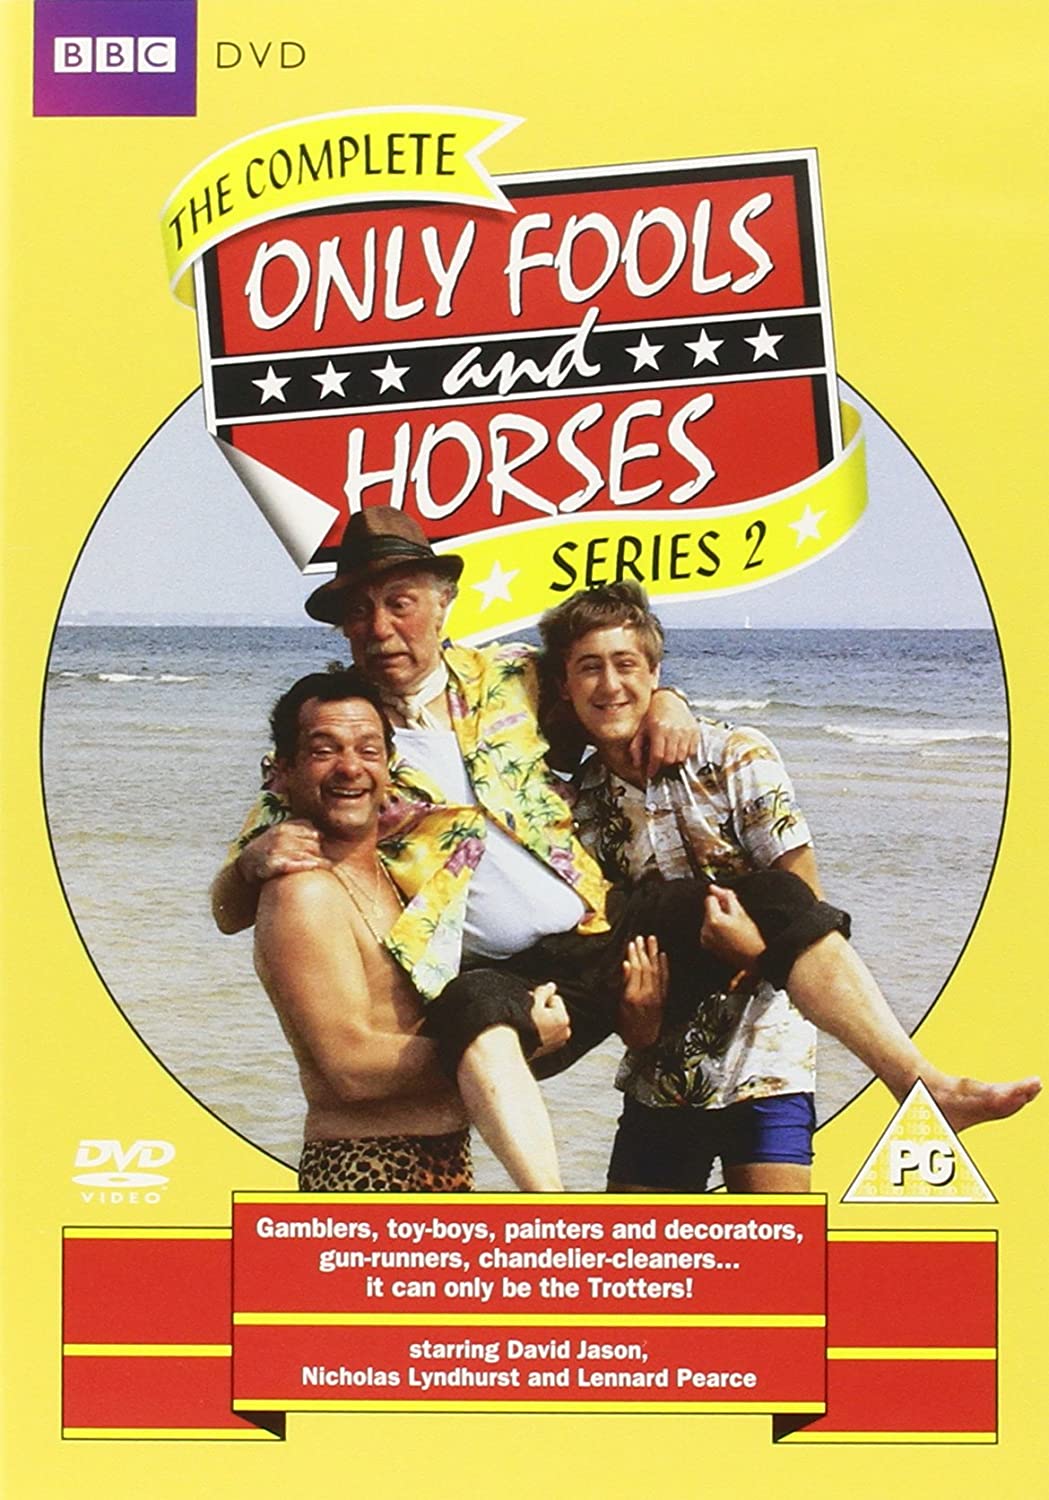 Only Fools and Horses - Series 1-7 - Comedy [DVD]